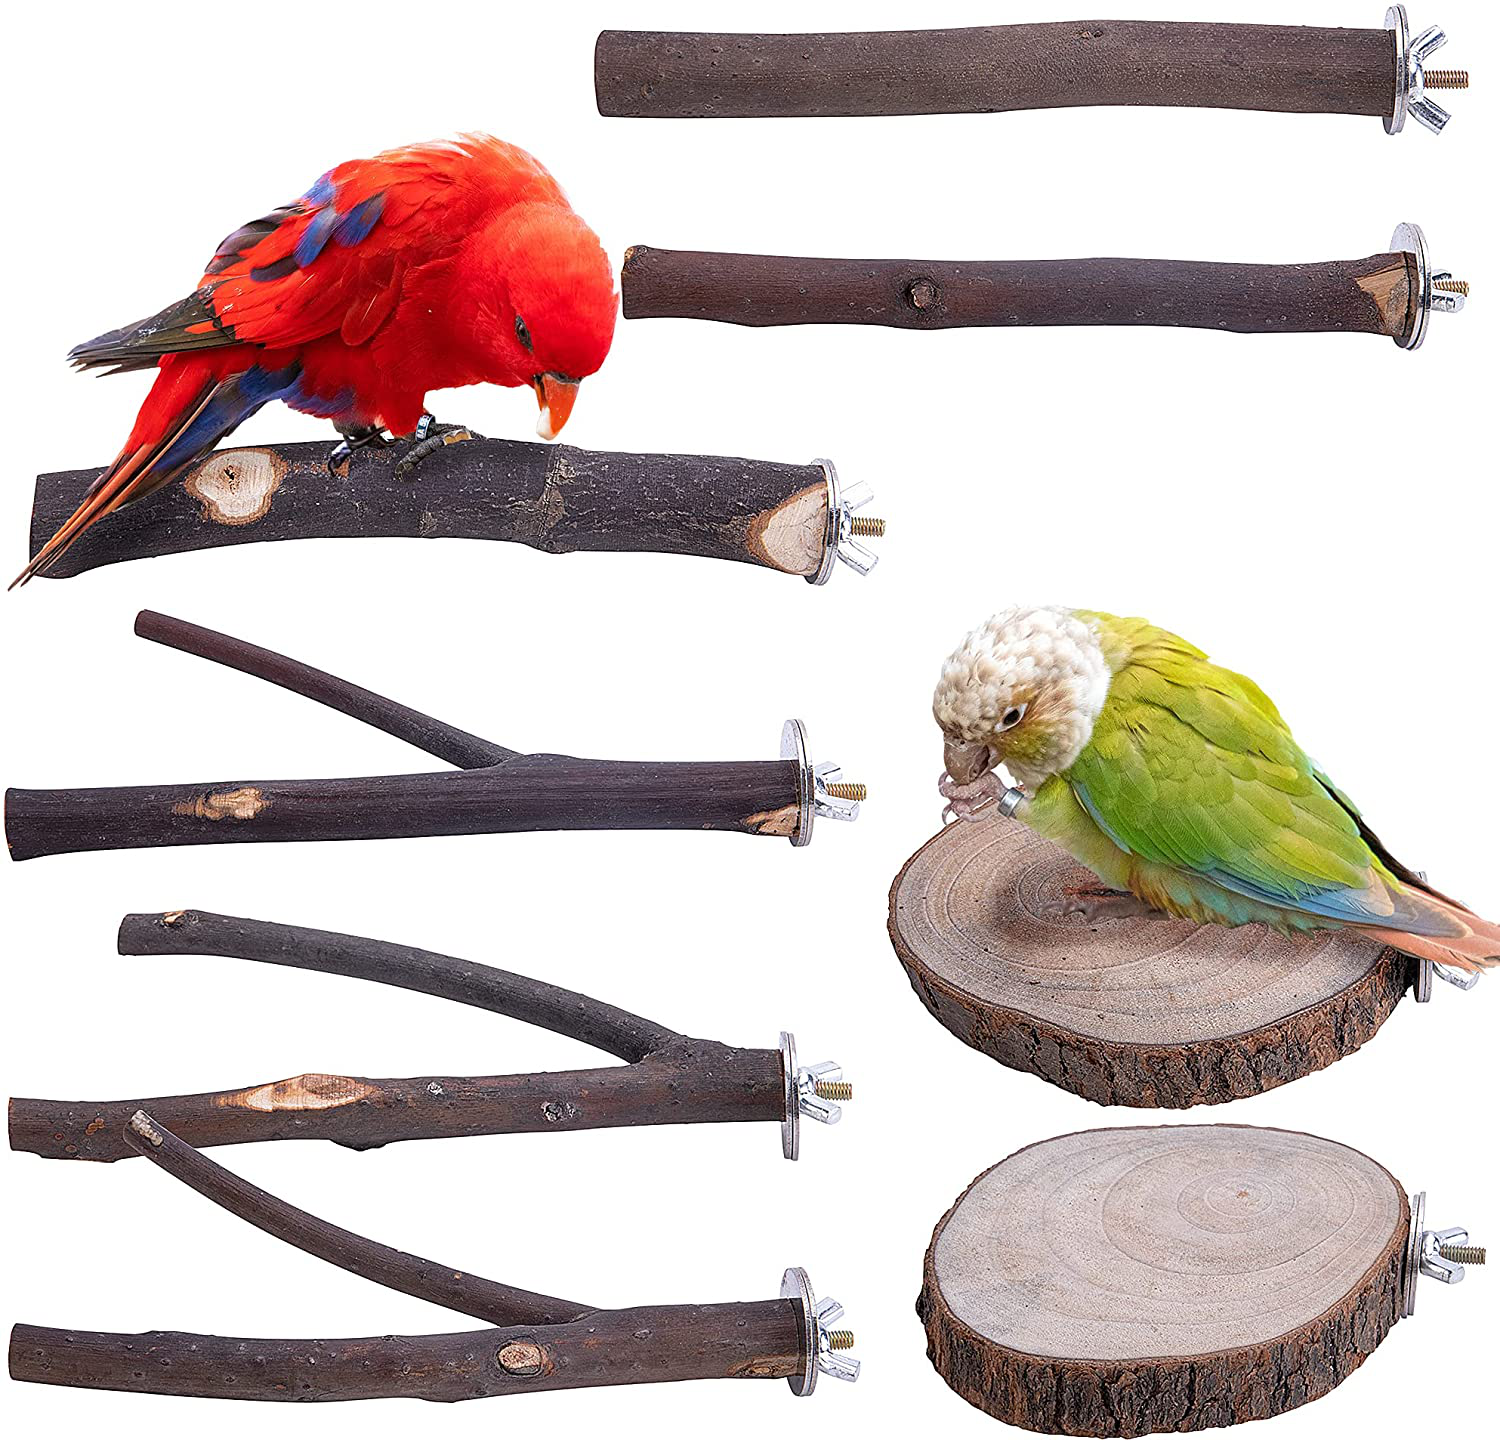  LIMIO Bird Playground Parrot Playstand Natural Wood